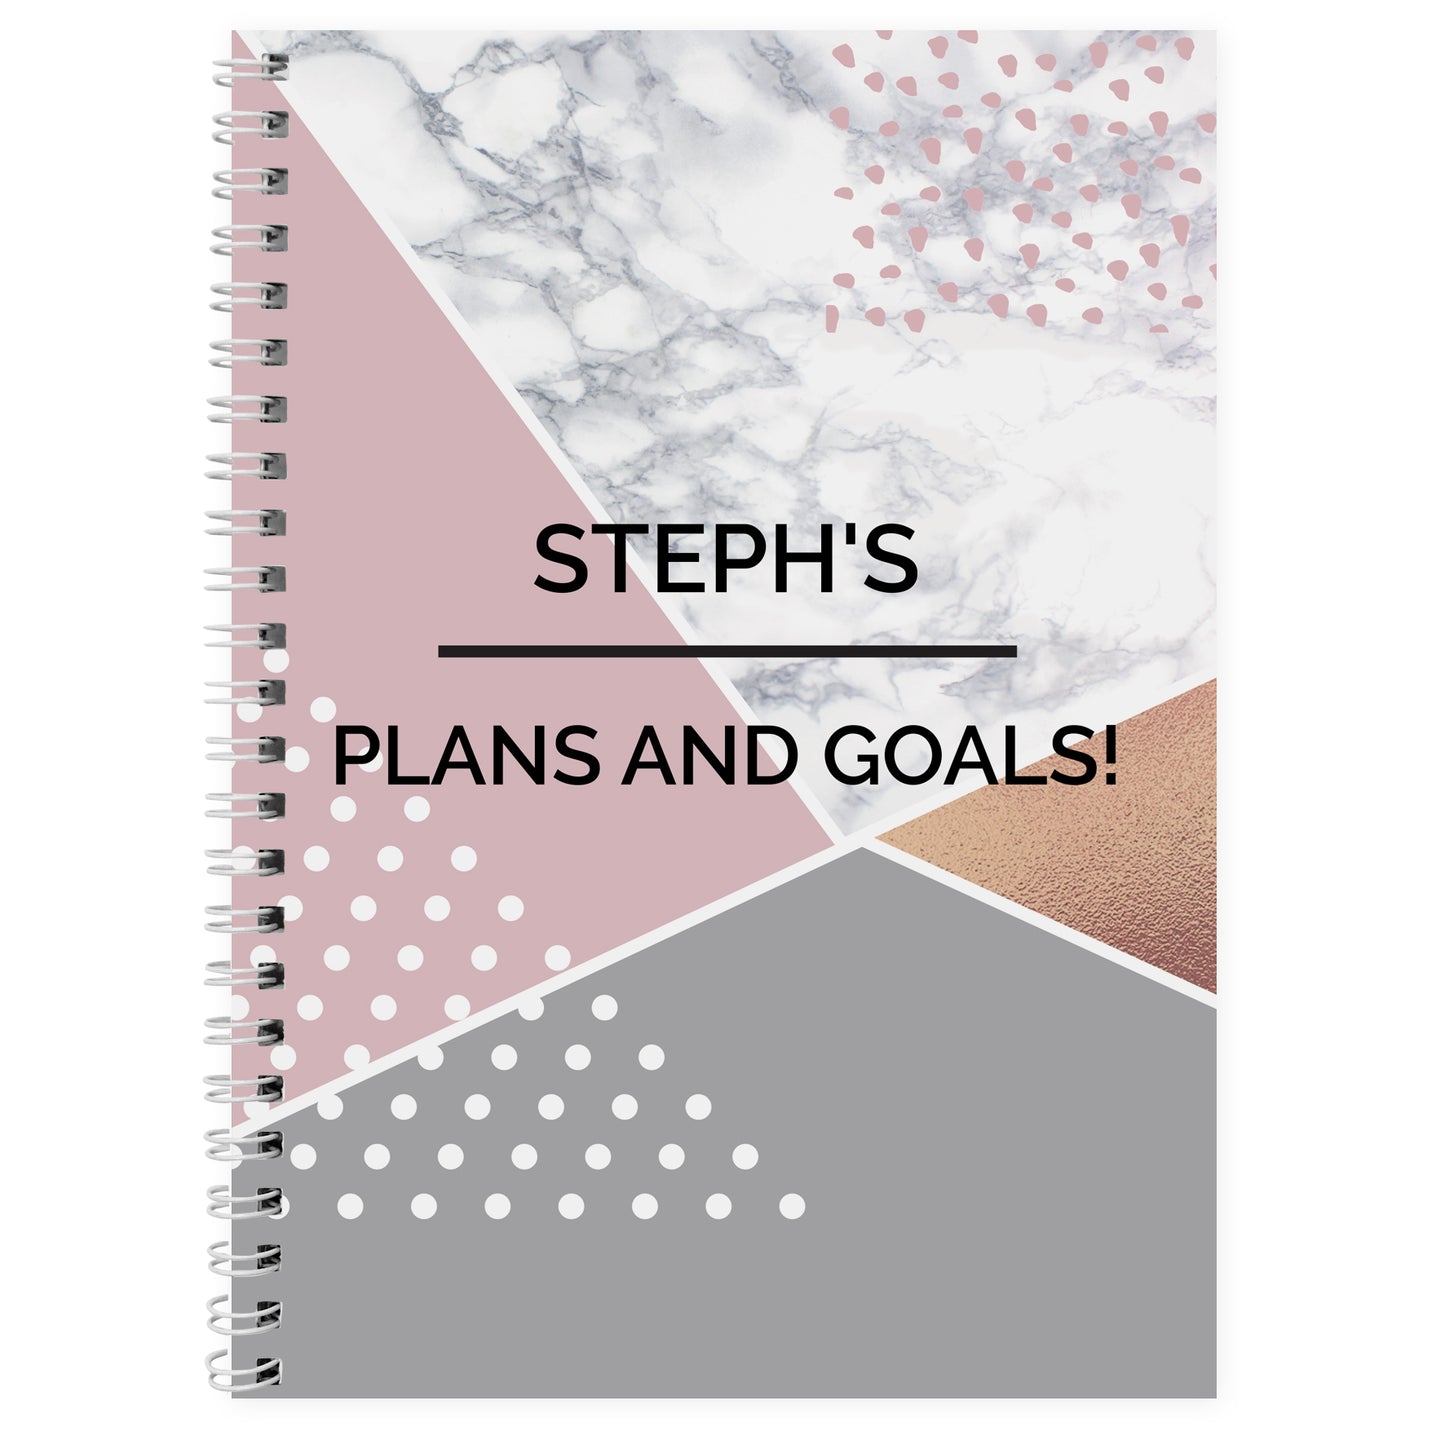 Personalised Geometric A5 Notebook